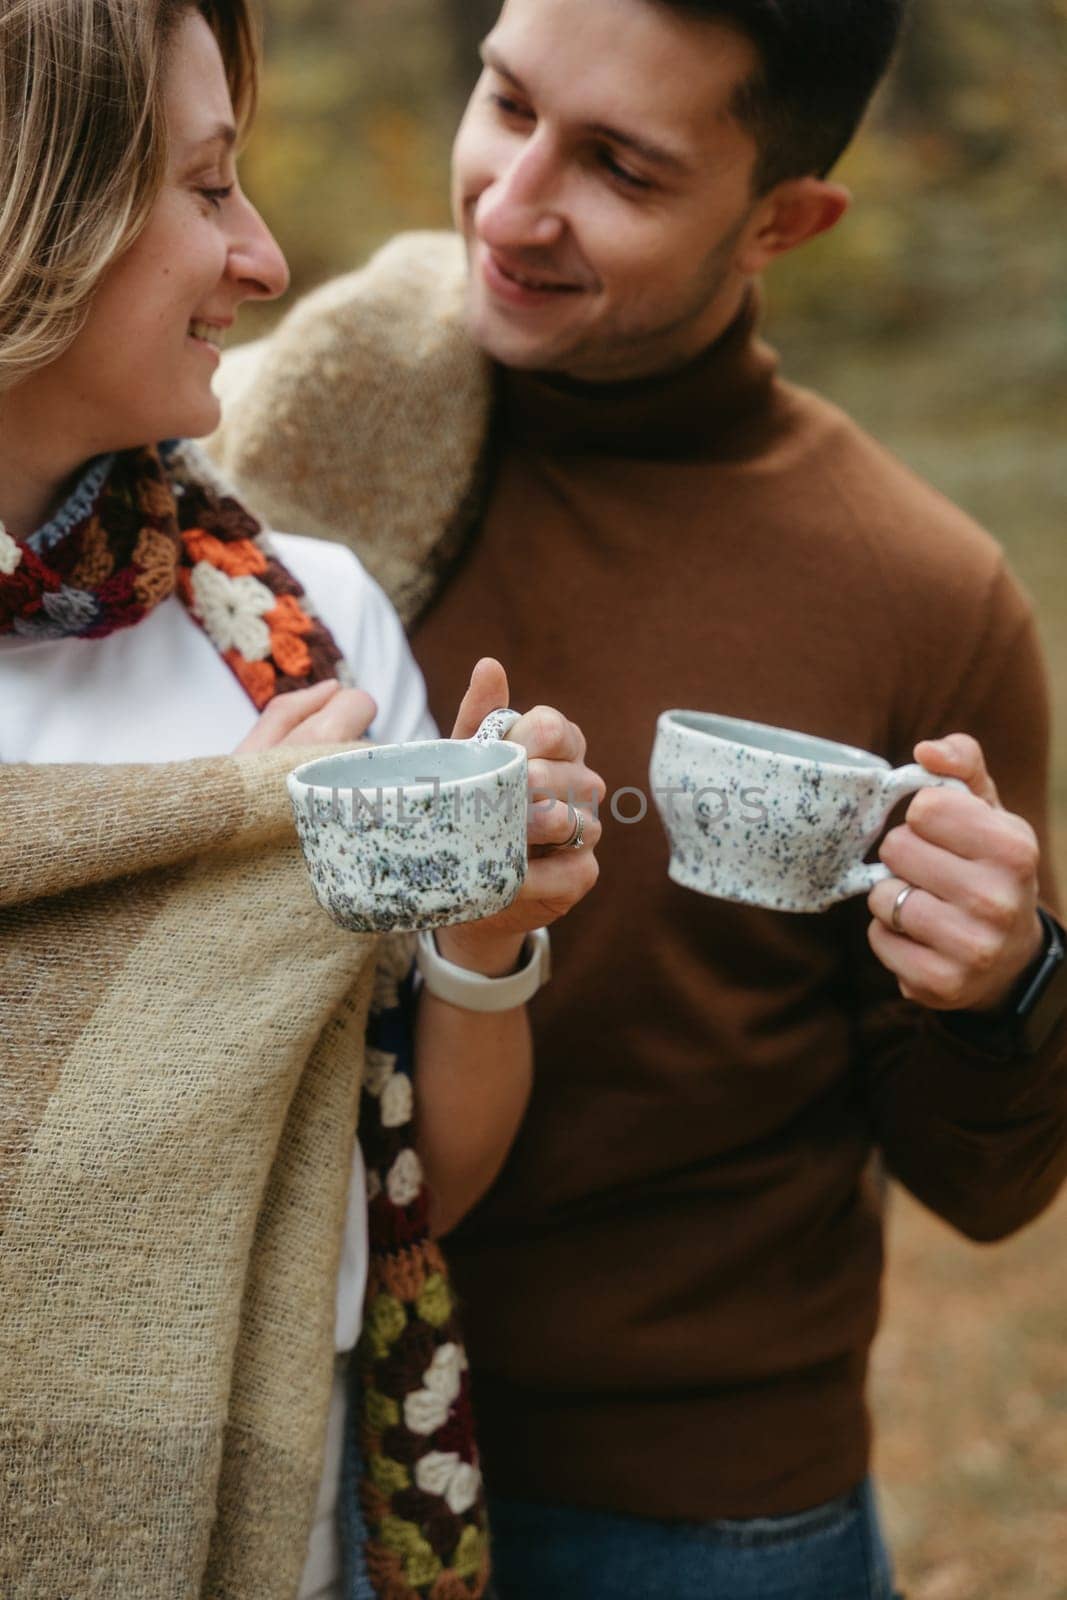 Man and a woman outdoors standing together smiling, holding handmade ceramic tea cups by Romvy